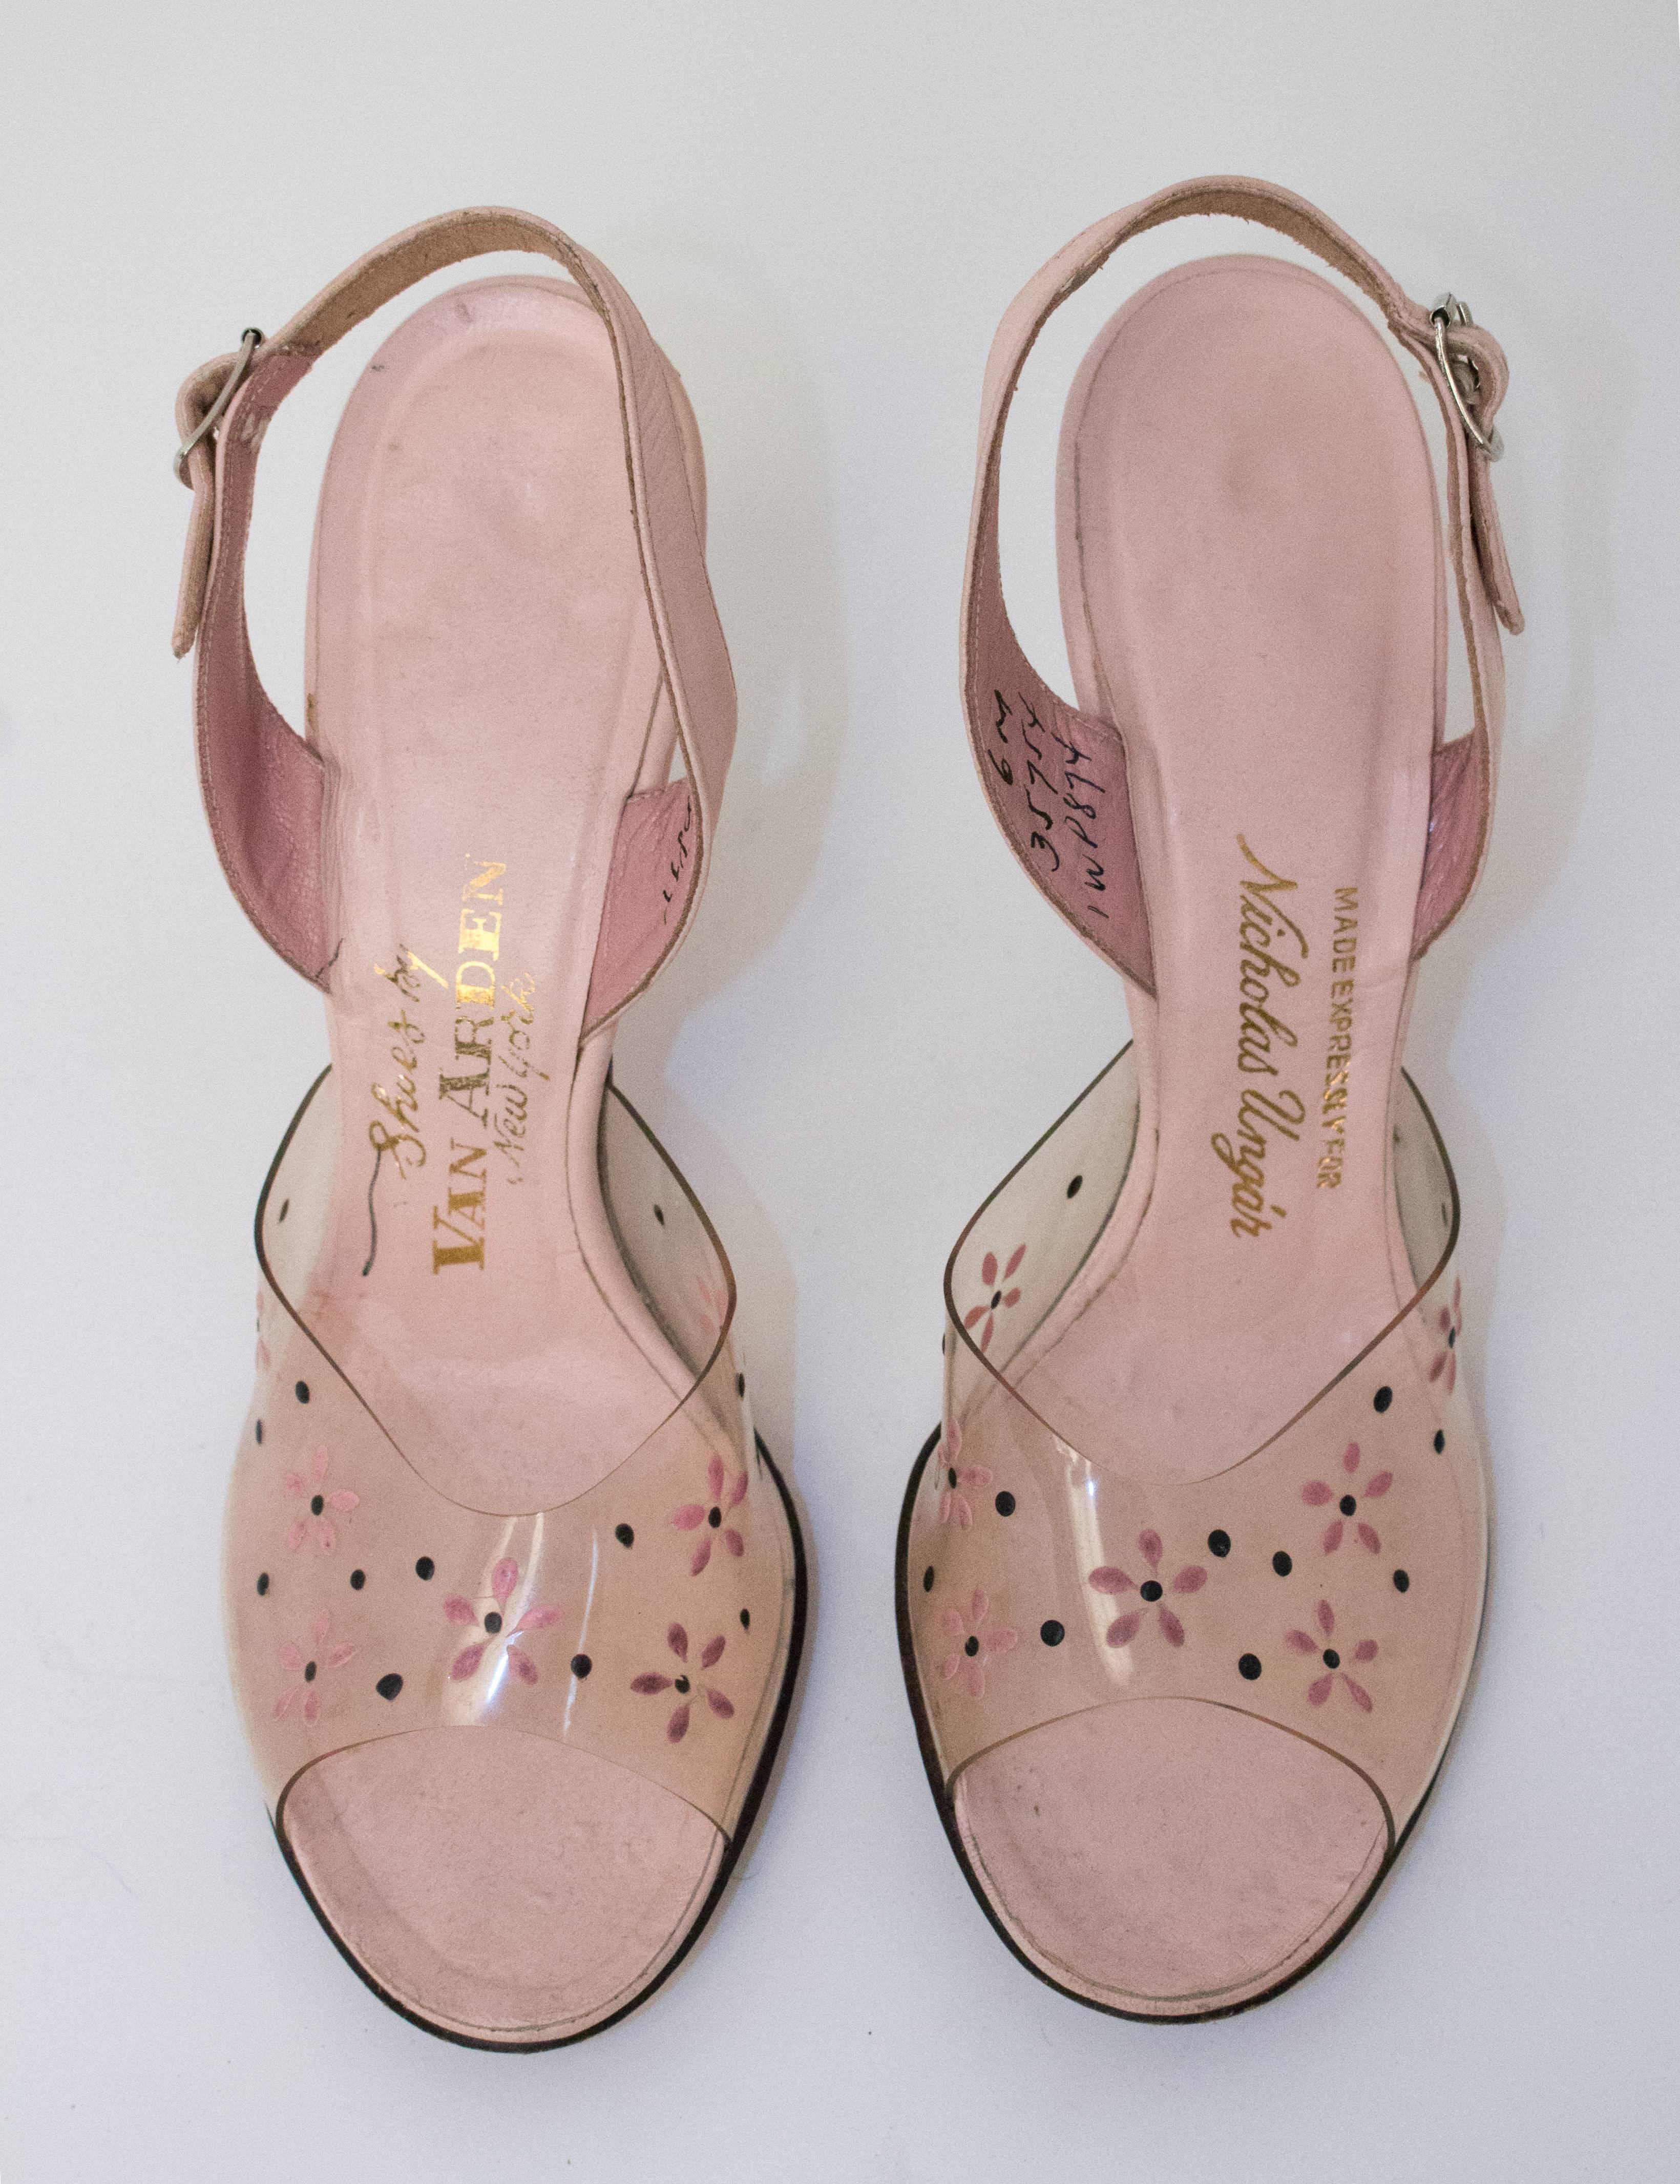 50s Pink Lucite Heels with Floral Painted Embellishment. Leather soles. 

Measurements:
Insole: 9 1/2"
Width: 2 3/4"
Heel: 3 1/2" 